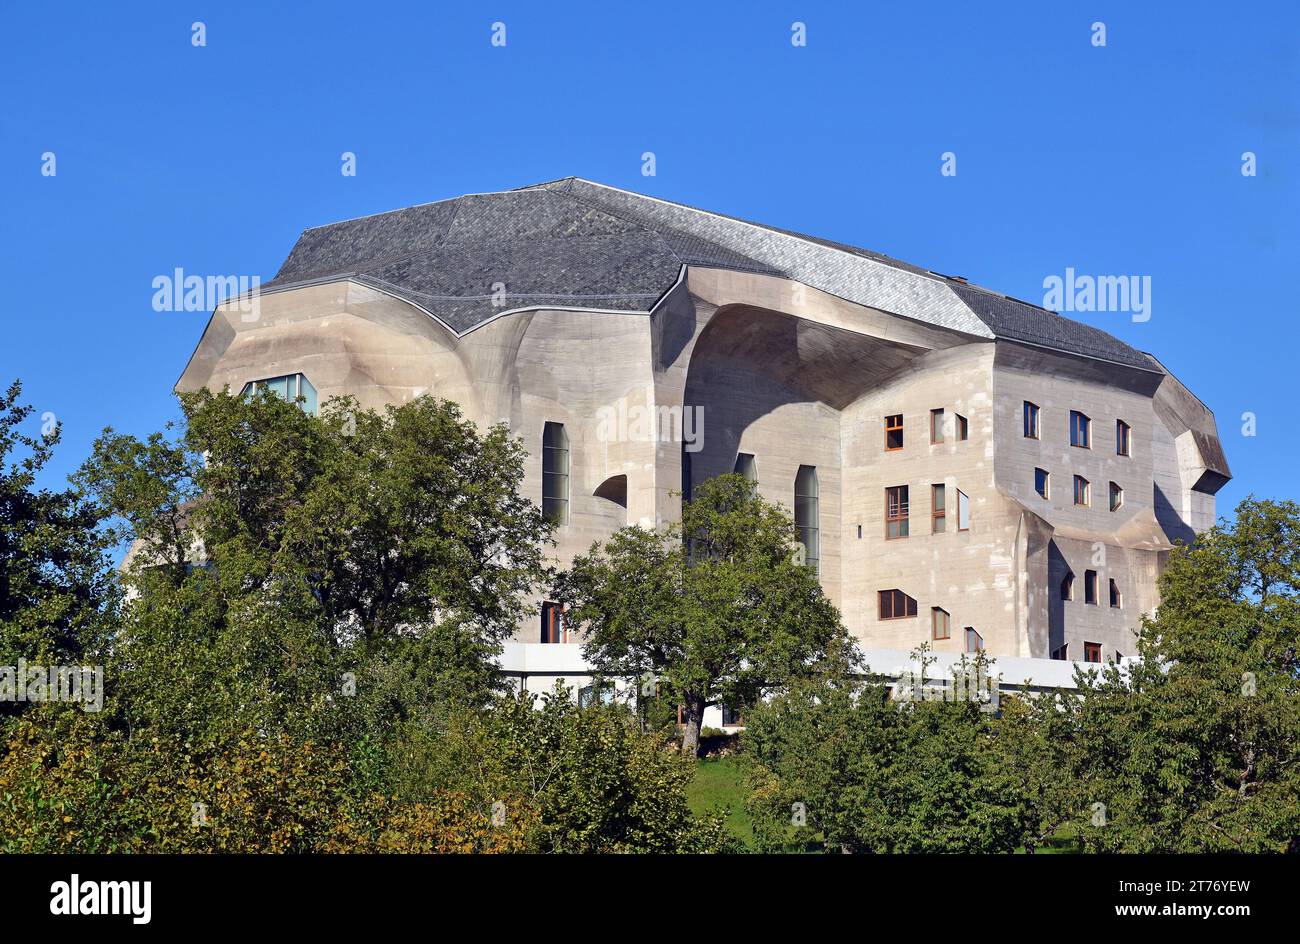 The Goetheanum, world centre of the anthroposophical movement, designed by Rudolf Steiner, founder of the movement, built 1924-28, reinforced concrete Stock Photo